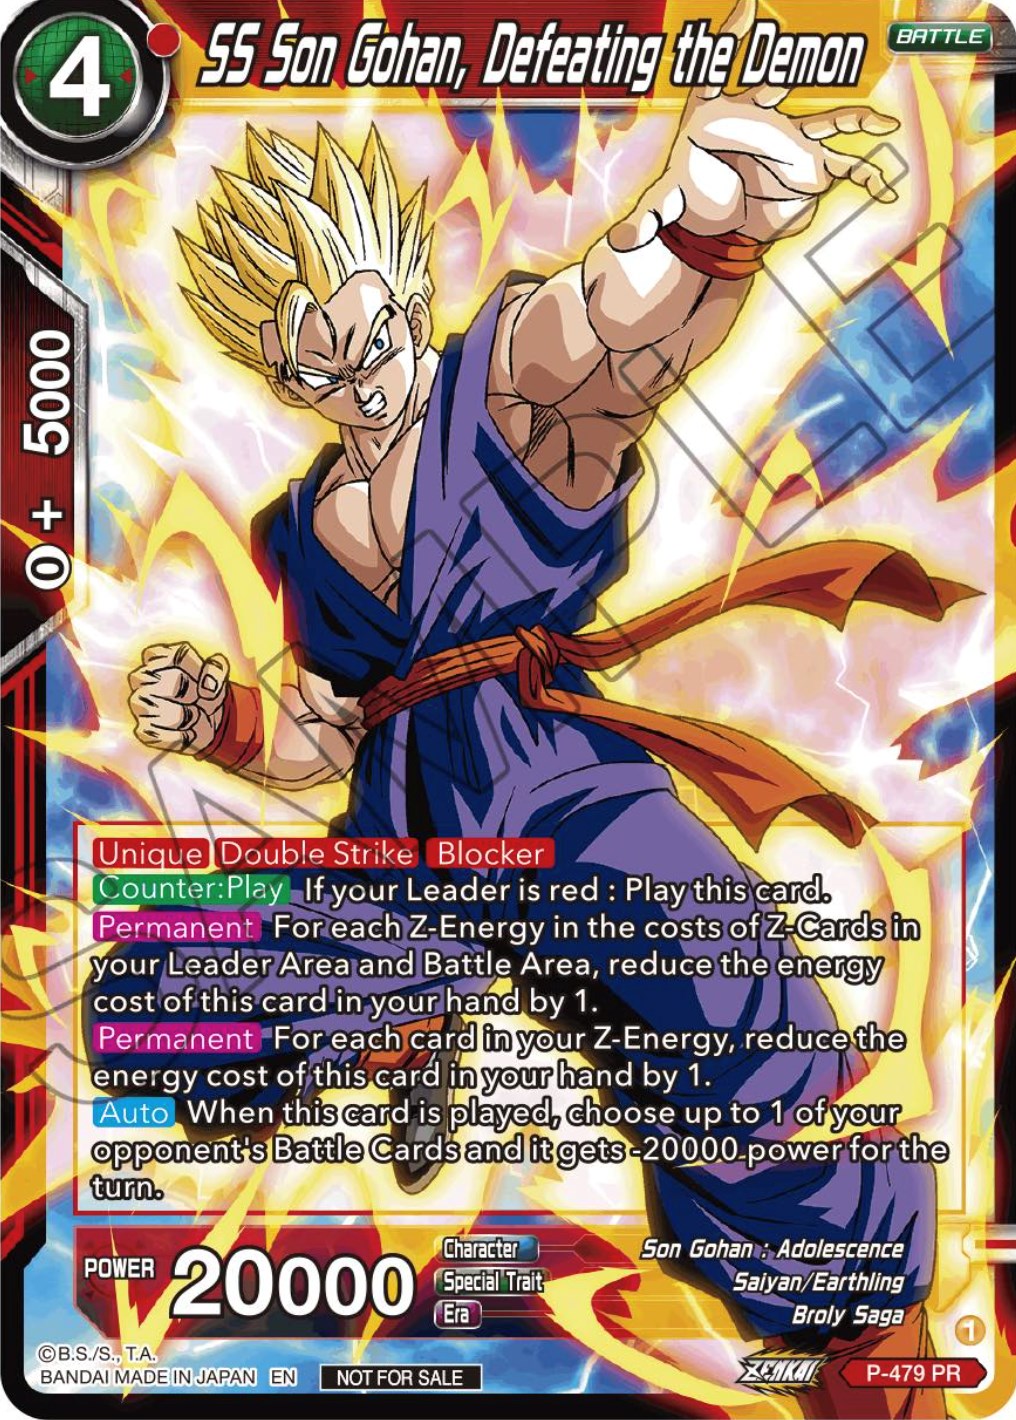 SS Son Gohan, Defeating the Demon (Zenkai Series Tournament Pack Vol.3) (P-479) [Tournament Promotion Cards] | North Valley Games